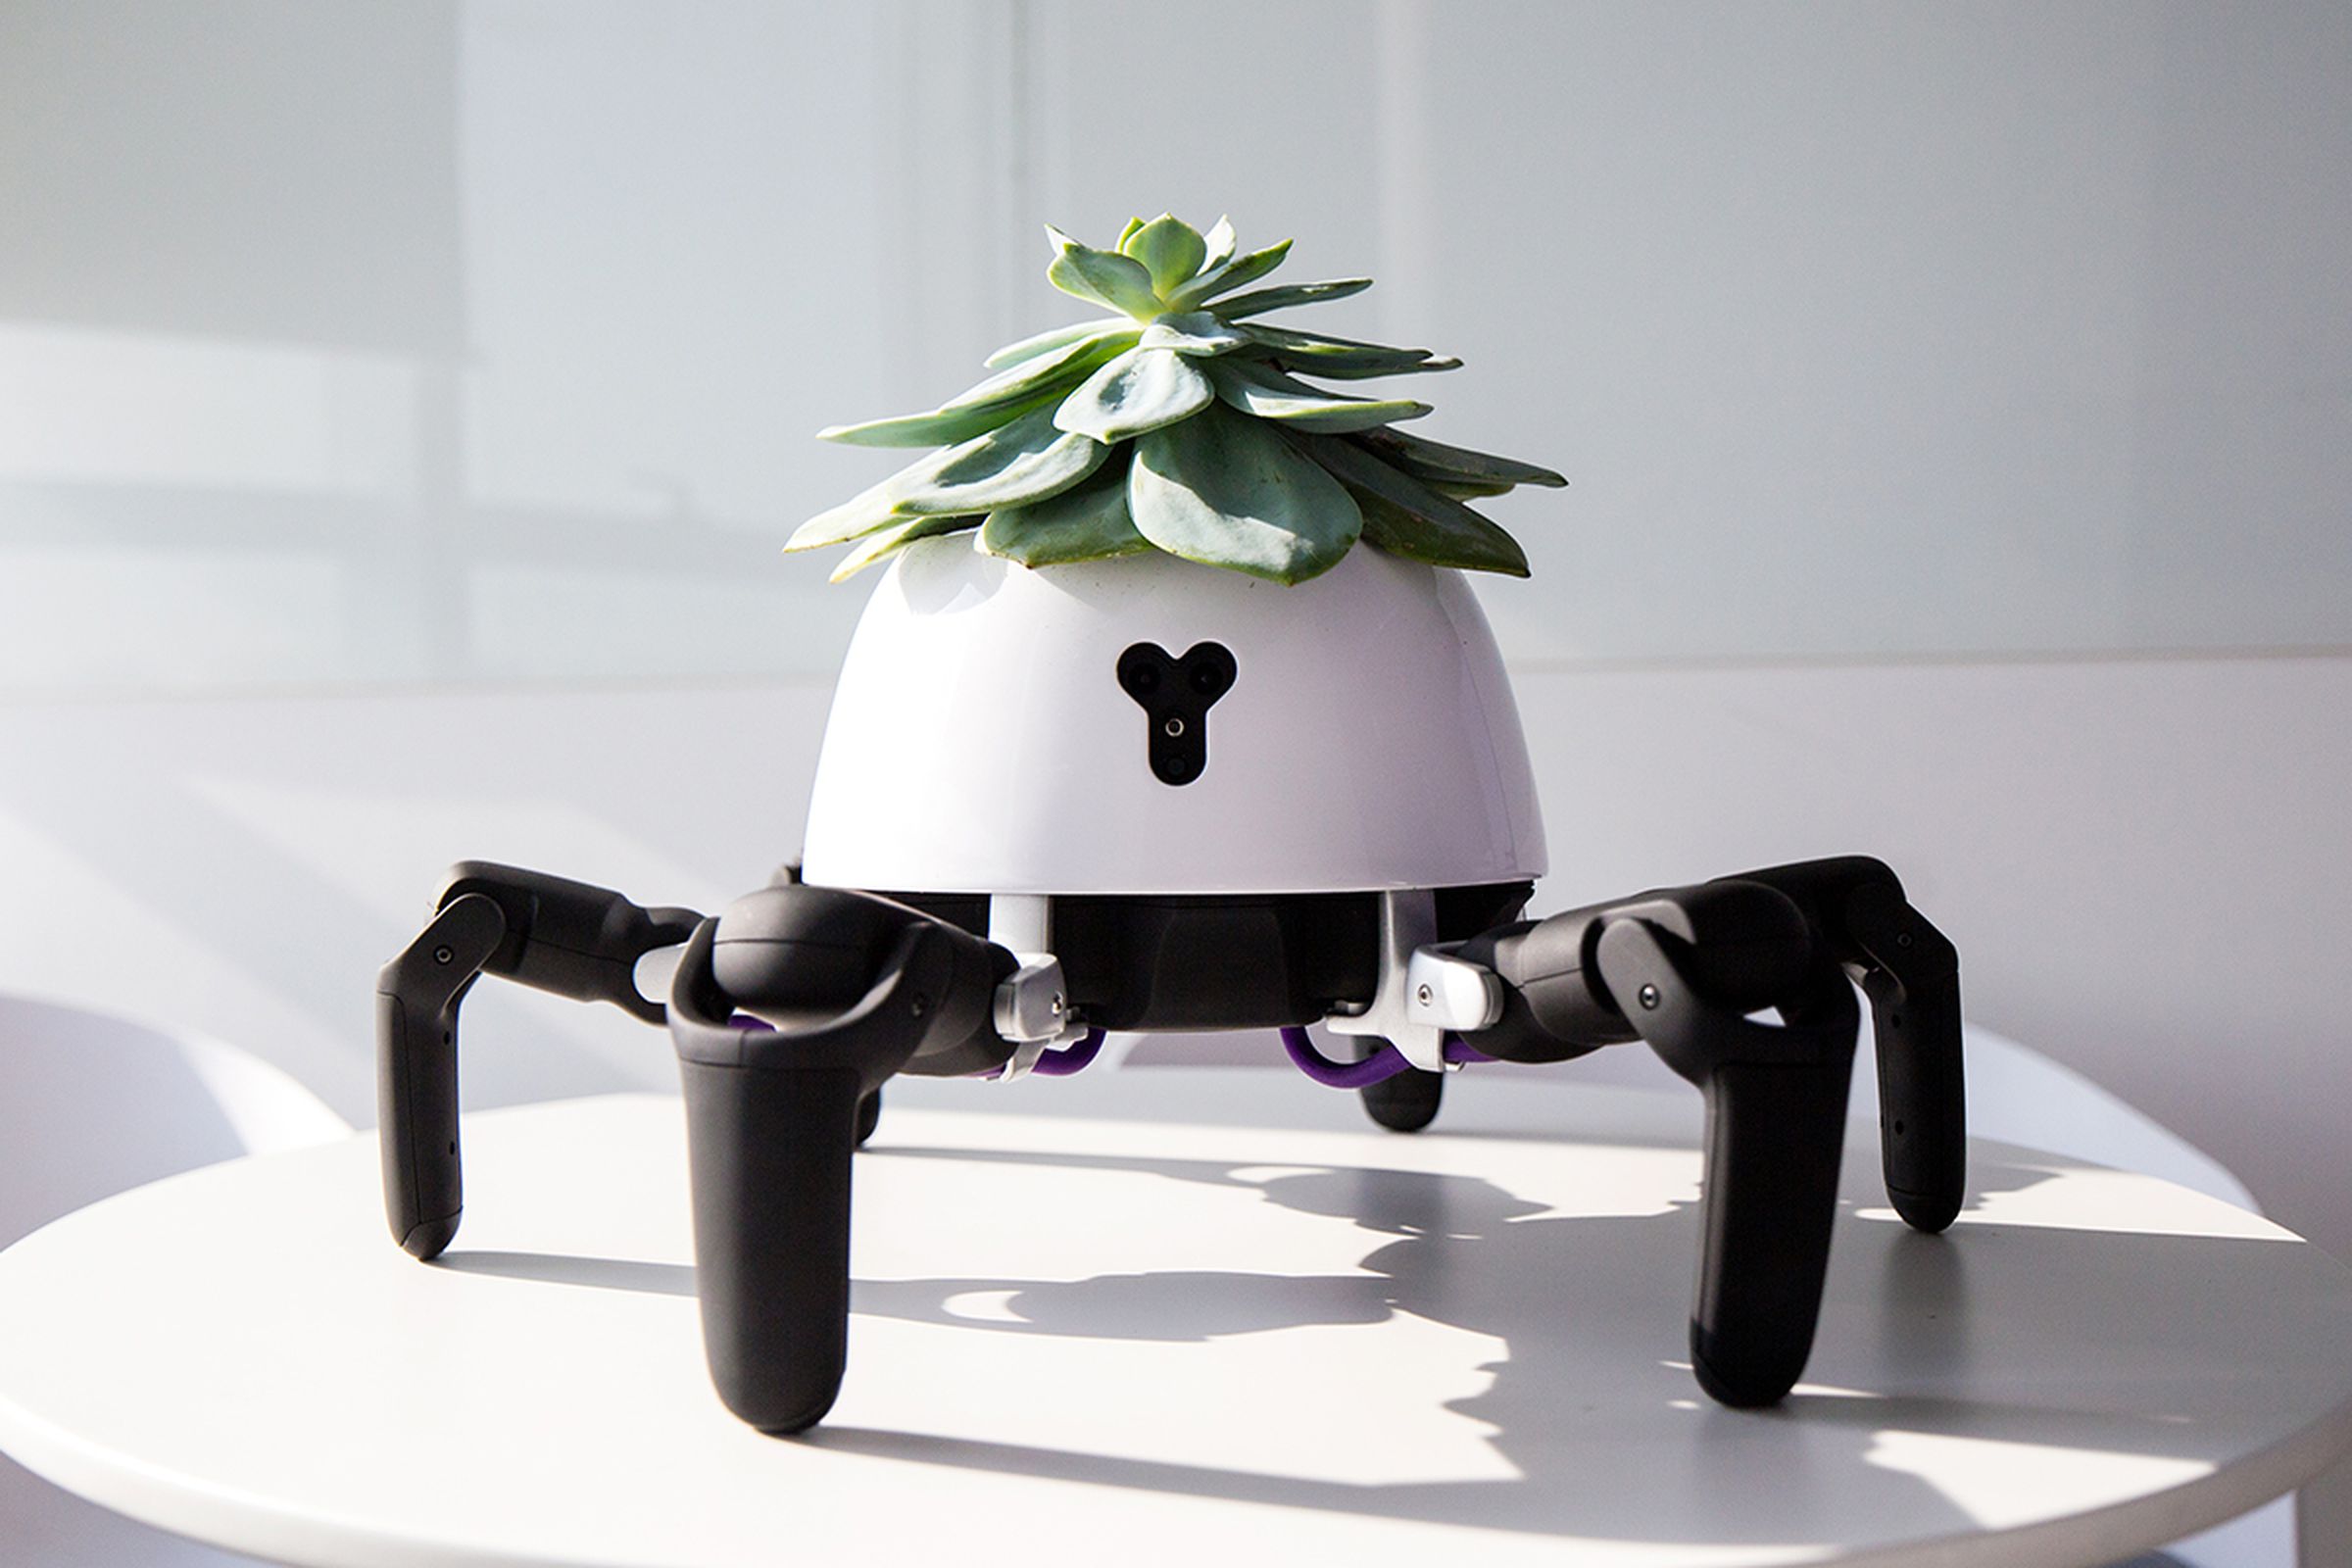 The robot-plant hybrid, built by Vincross founder Sun Tianqi.